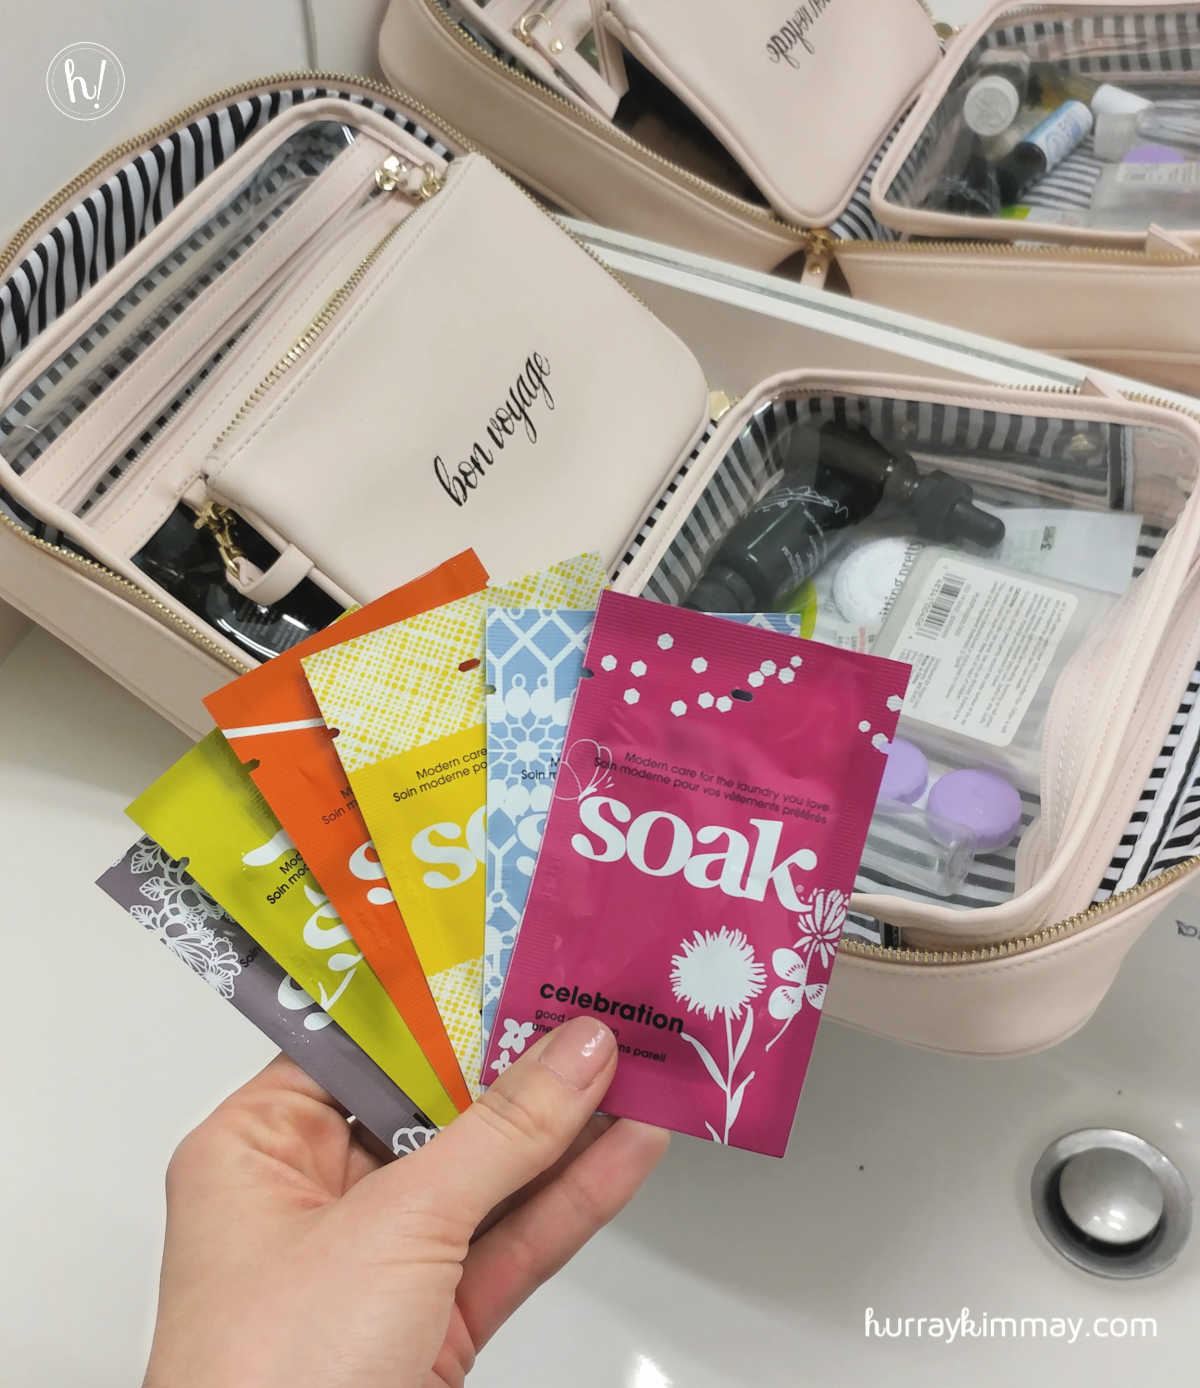 Kimmay shares Soak travel packs for washing delicates on the go